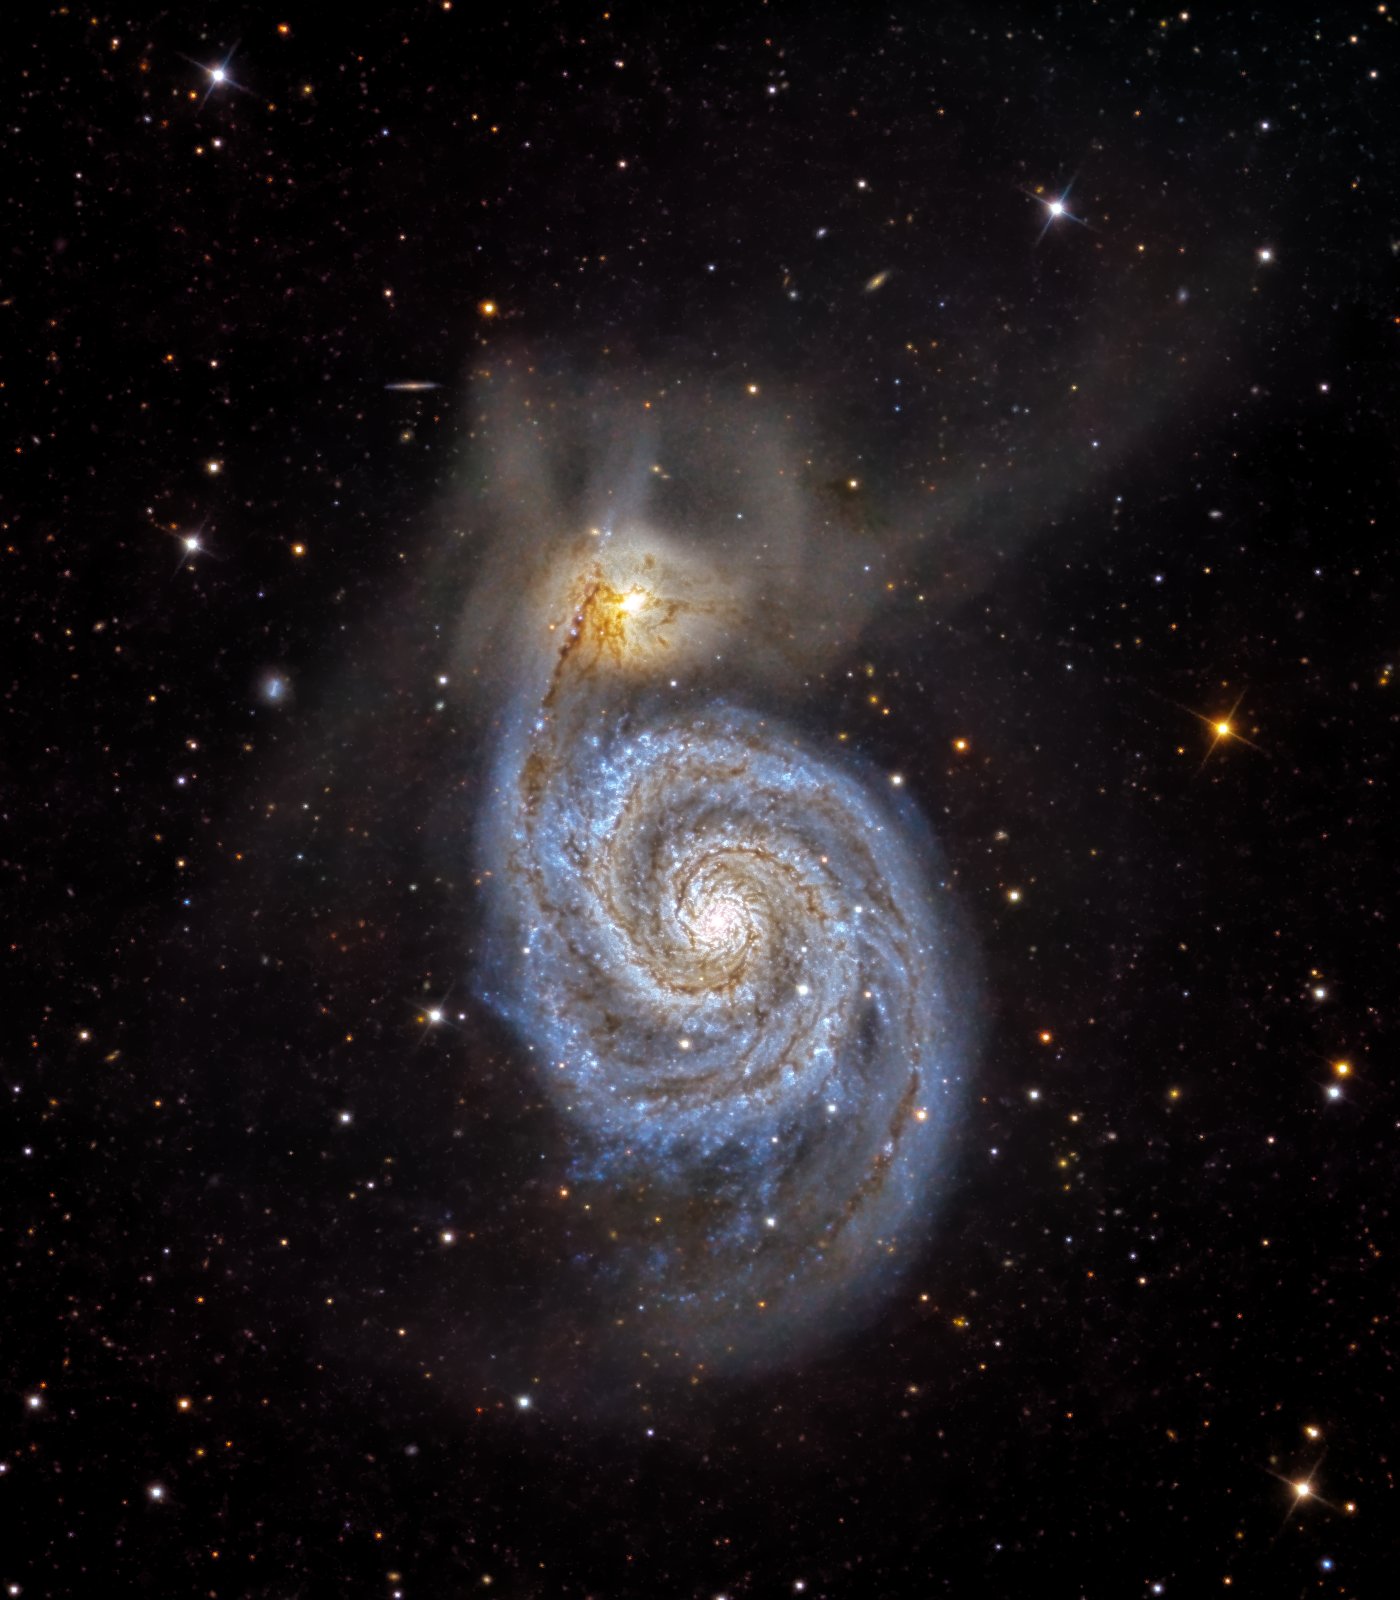 M51 (NGC 5194 and NGC 5195, Whirlpool Galaxy) in continuum light